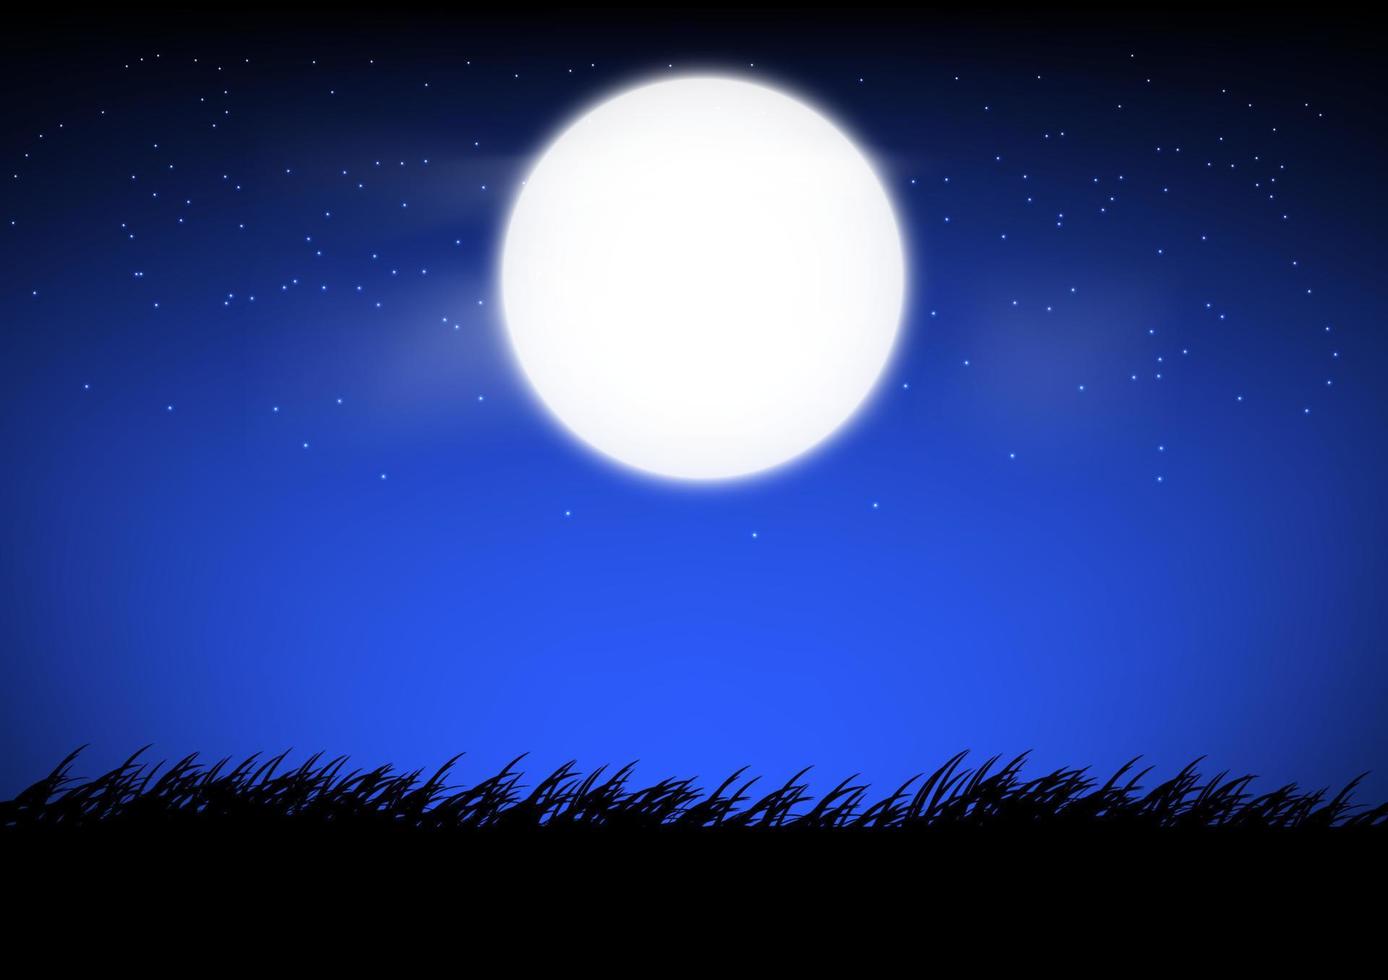 graphics design the moon and sky star with grass outdoor landscape view at night time vector illustration